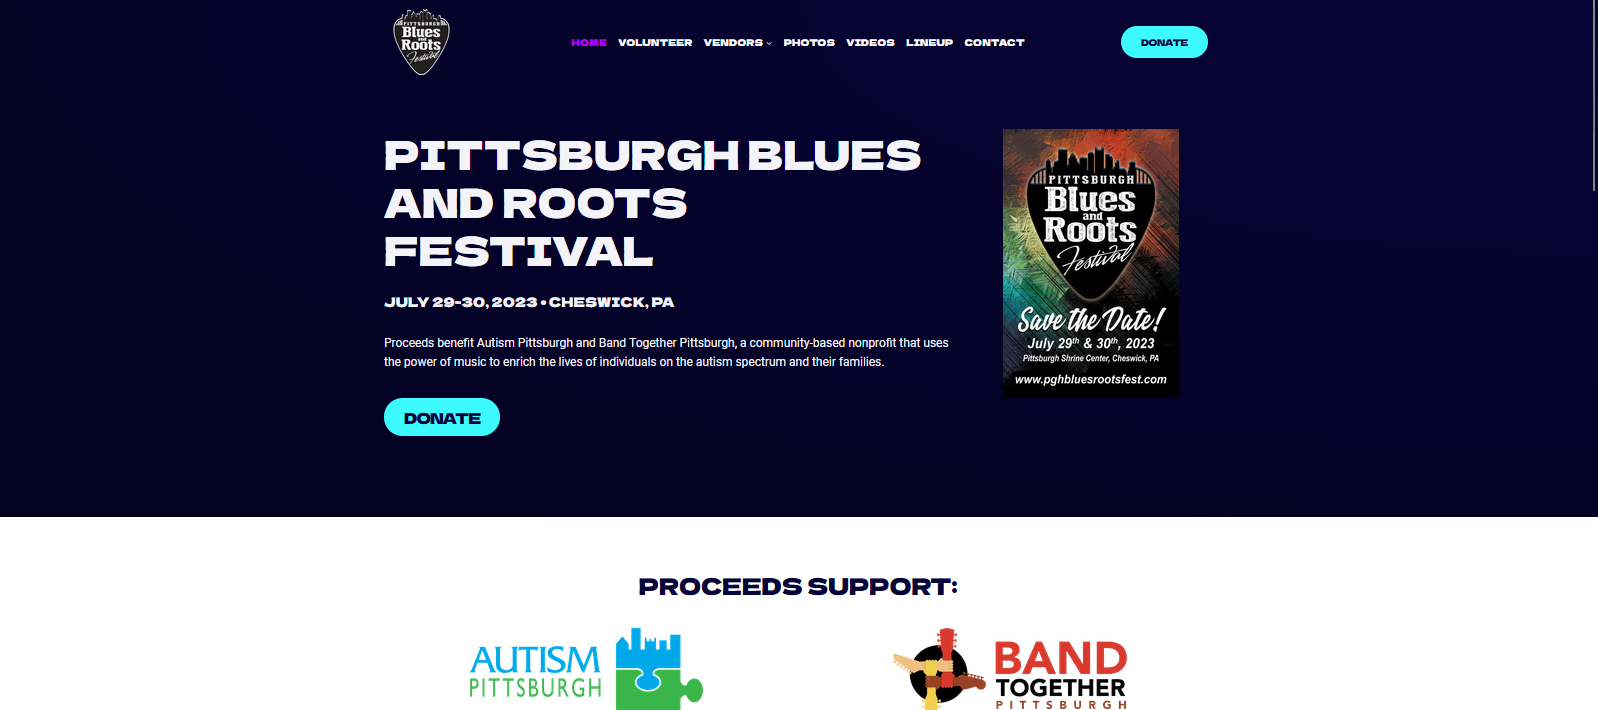 Contact Pittsburgh Blues and Roots Festival